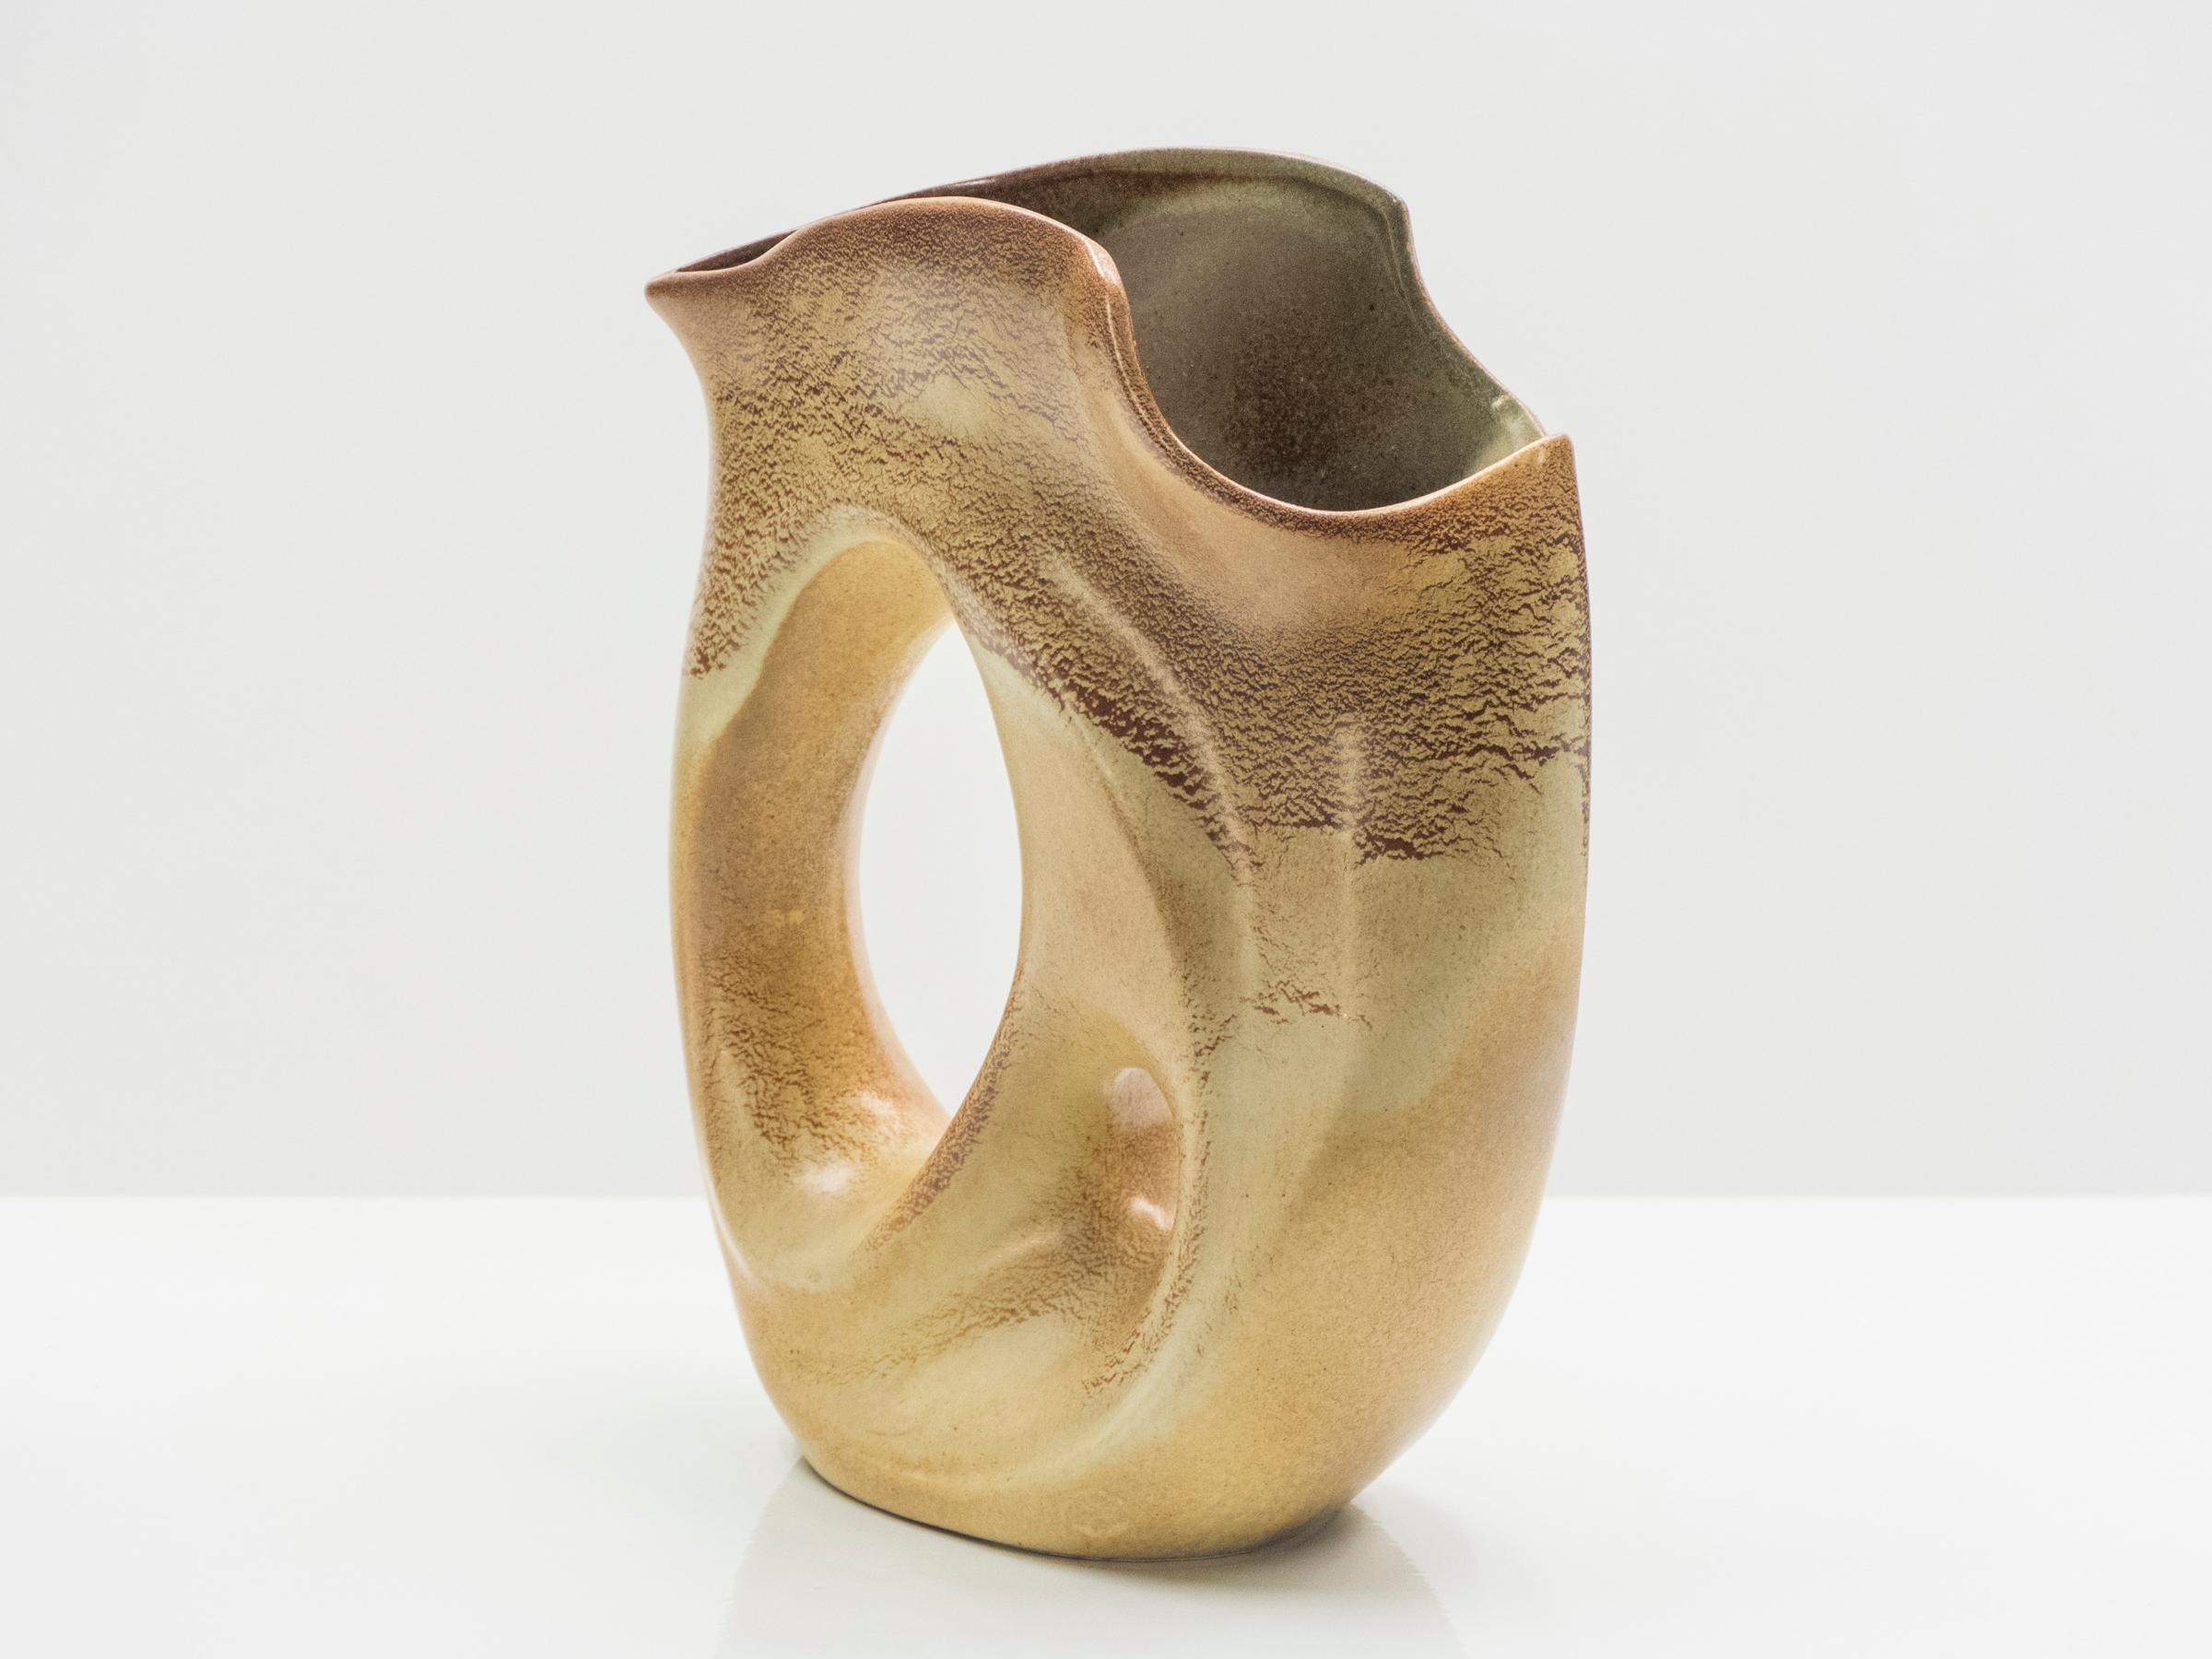 This curved French Vallauris vase would be beautiful in any space. It was created in the 1960s by a French ceramicist from Vallauris. With a feminine body and a rich beige combination of colors, this vase is really one of a kind, chic and timeless.